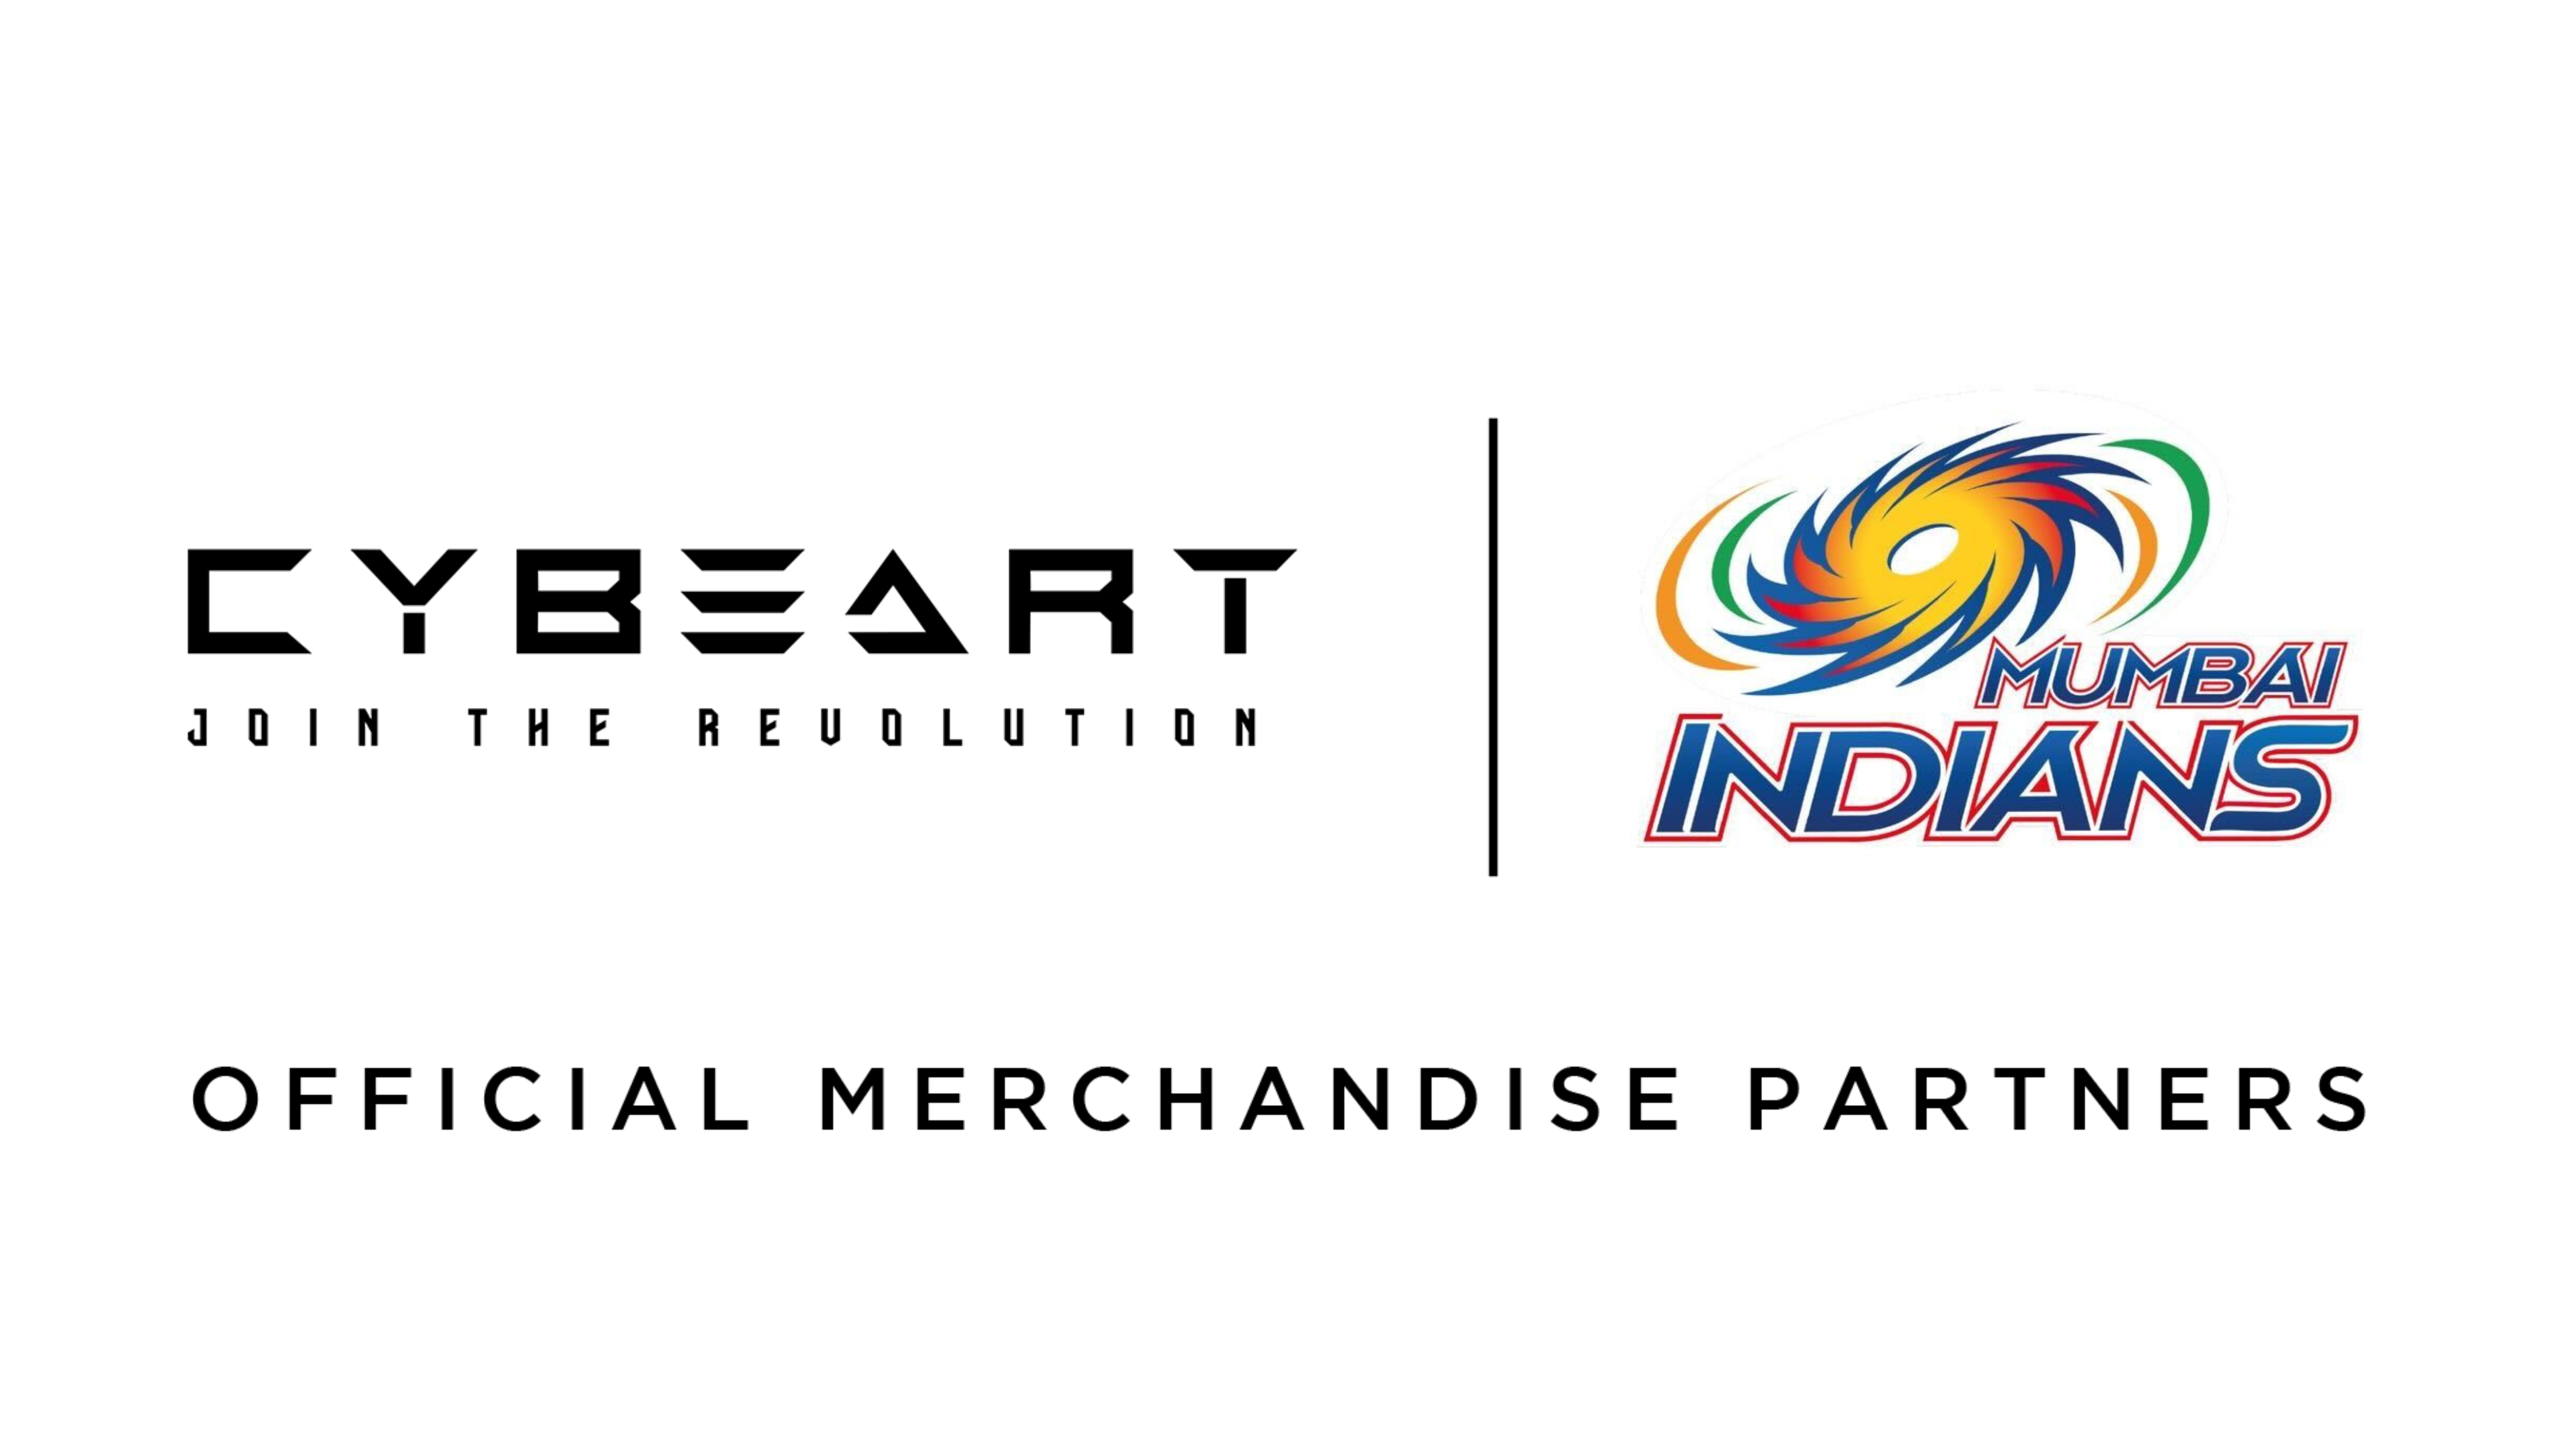 Cybeart X Mumbai Indians: Popular gaming chair brand expands footprint in cricket, announces multi-year deal with Mumbai Indians as Official Merchandise Partner